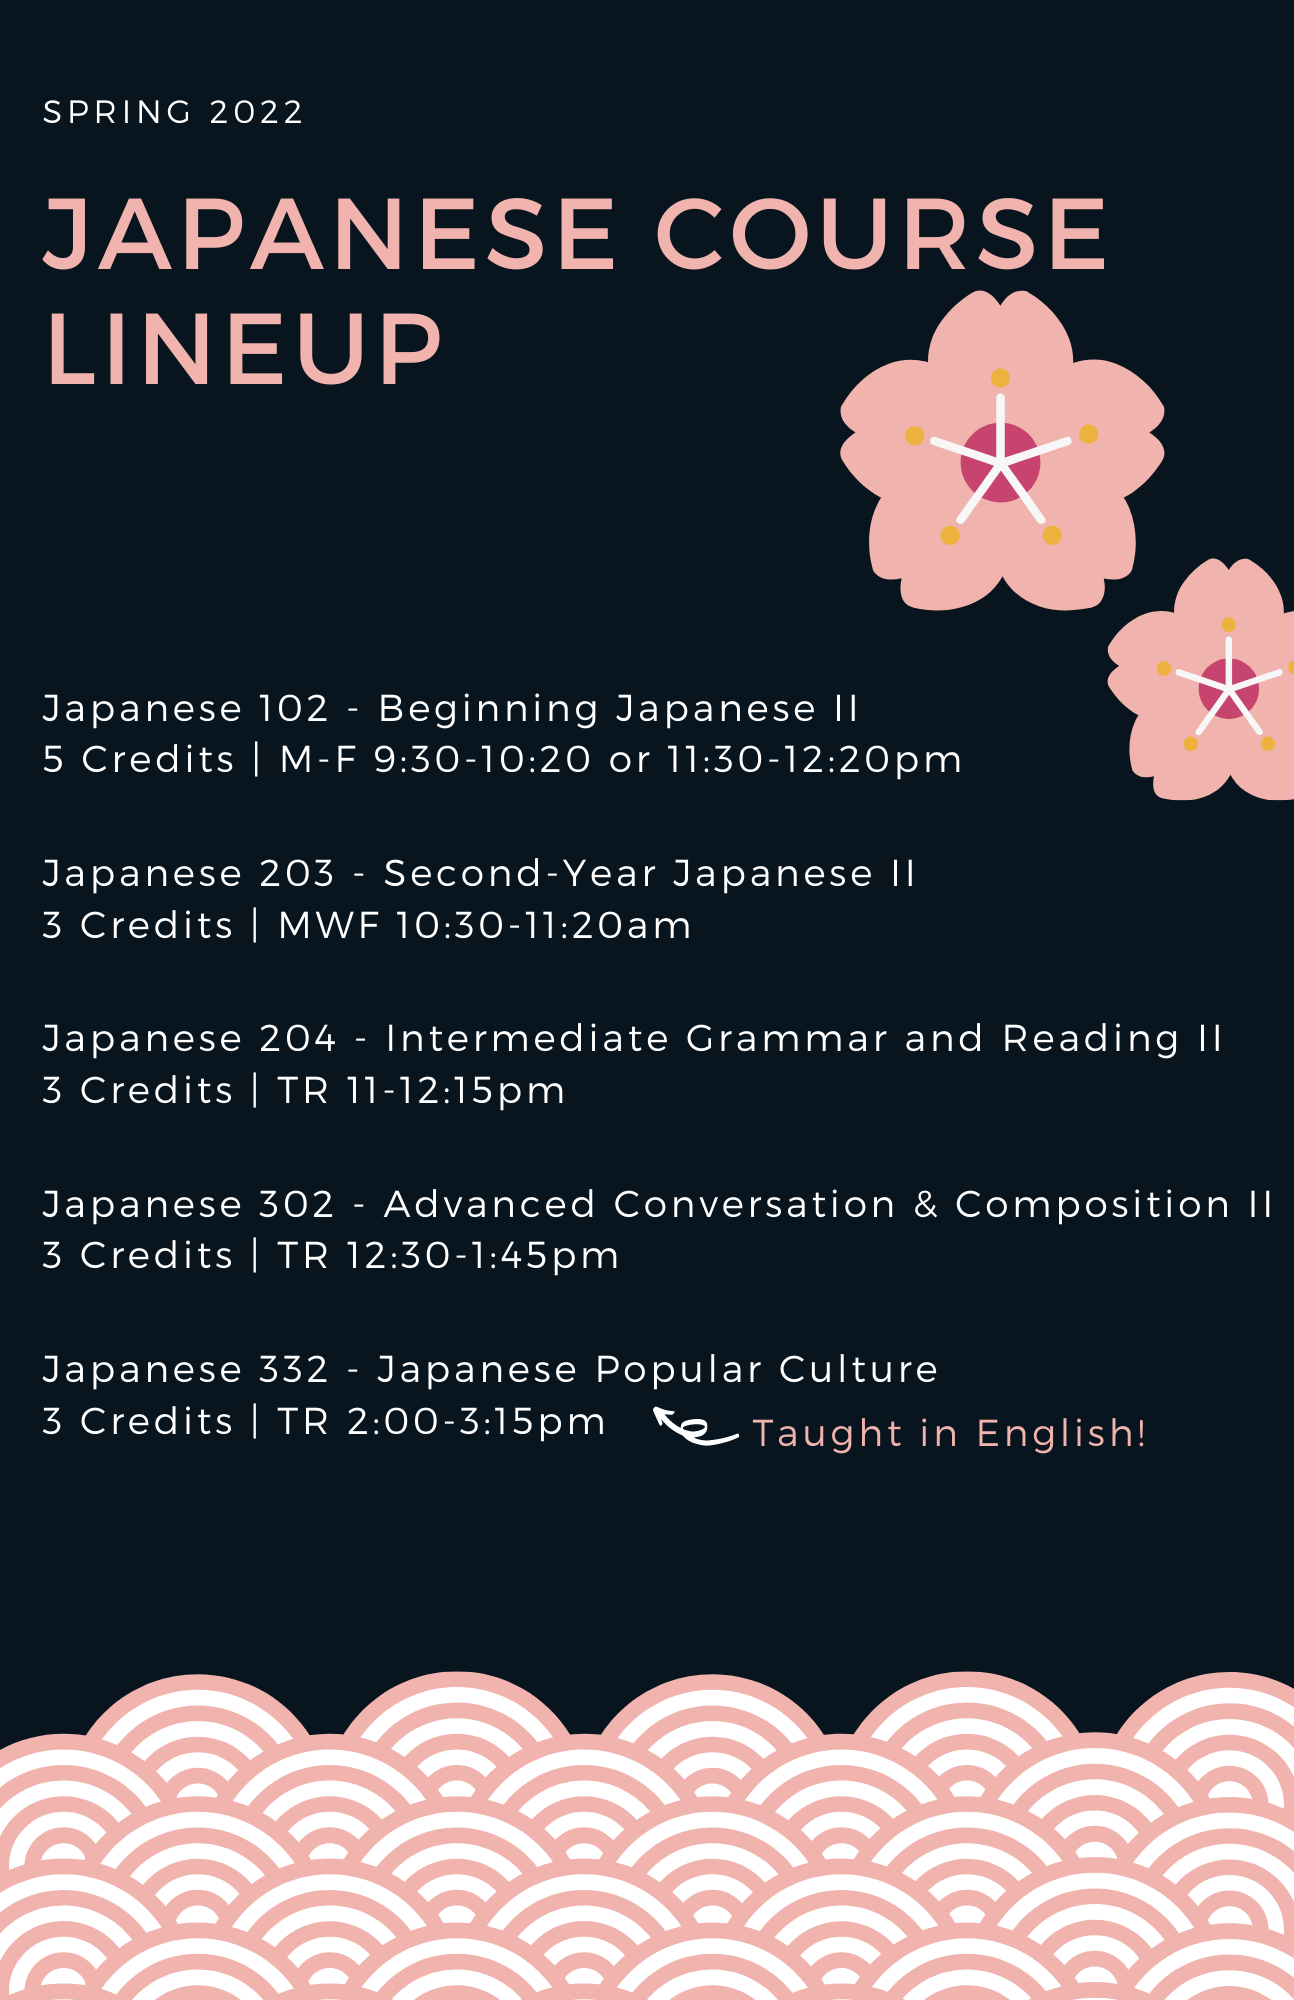 Spring 2022 Japanese Course Lineup